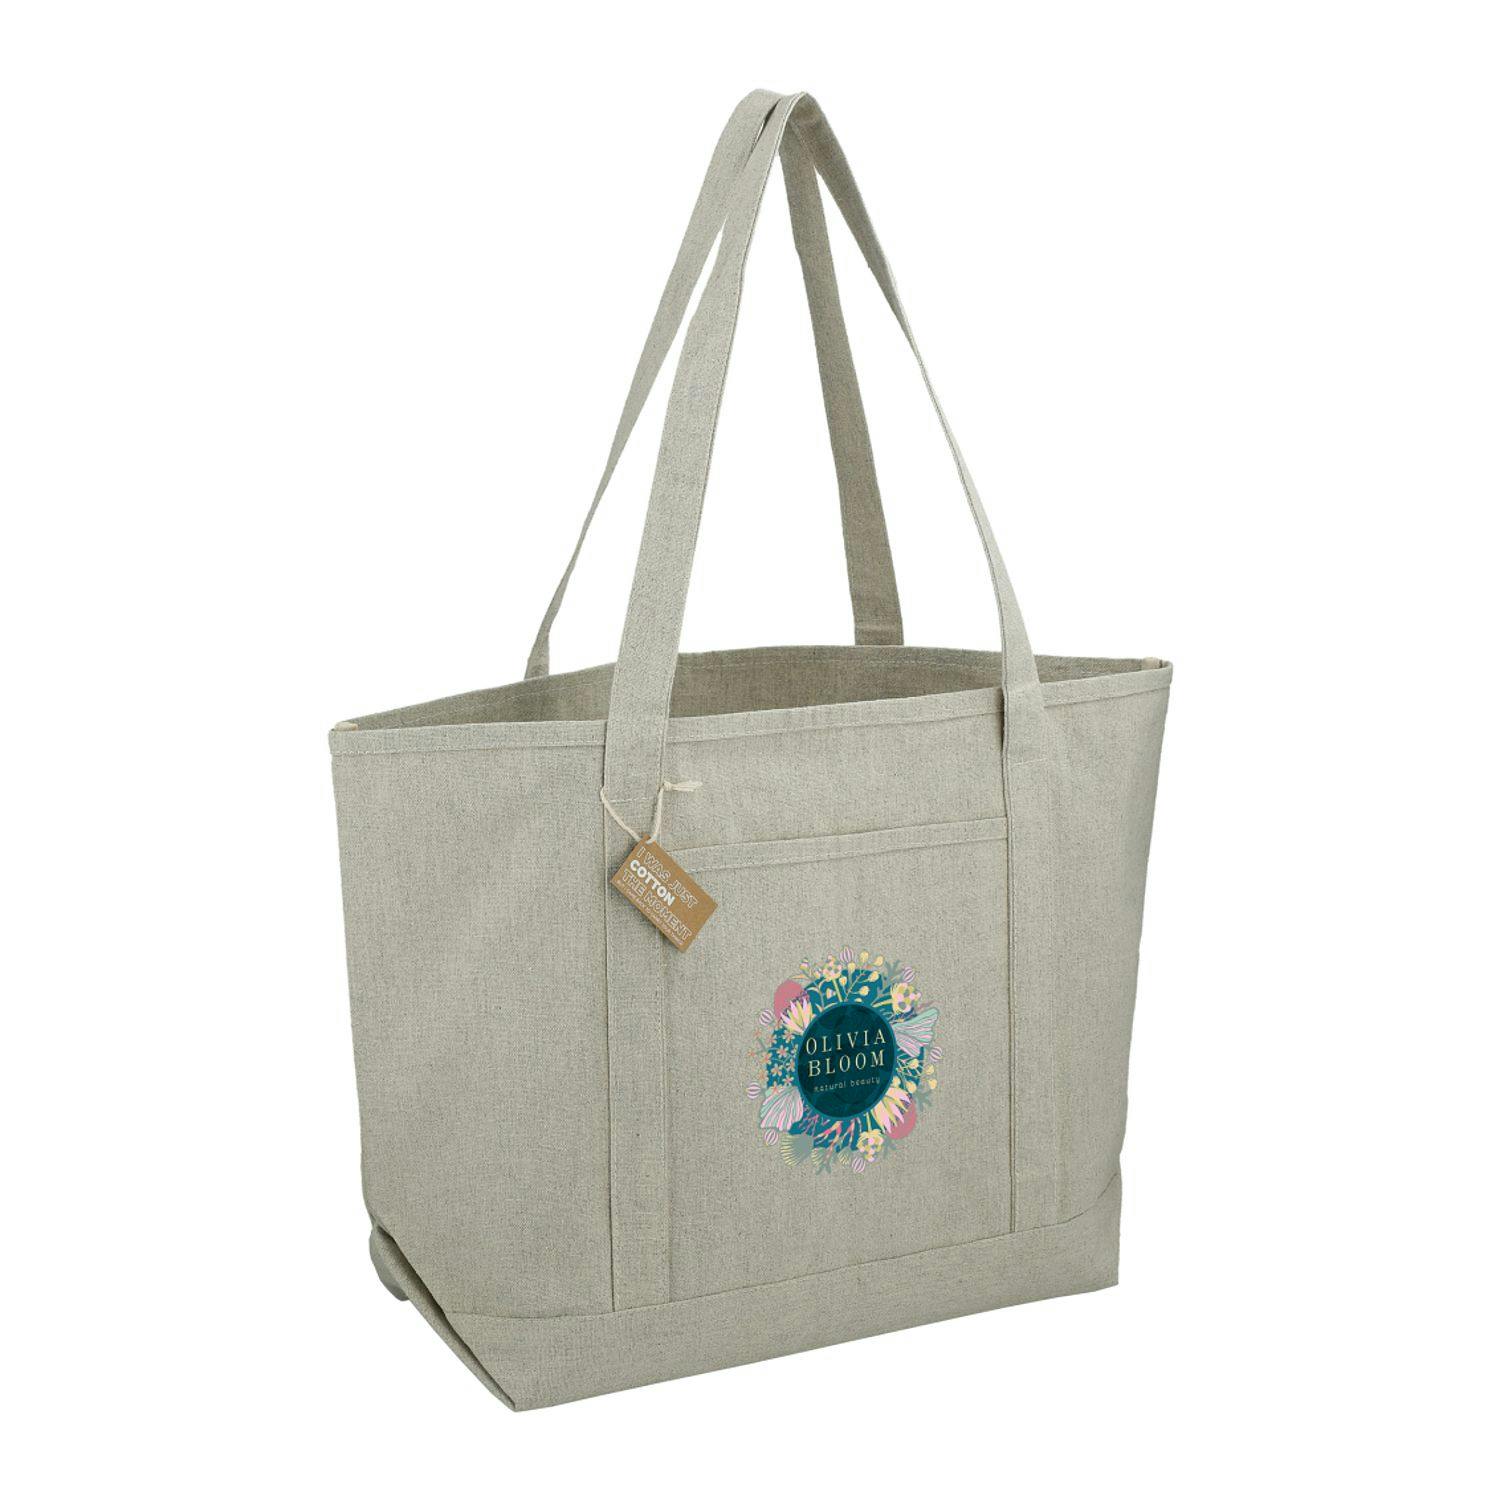 Repose 10oz Recycled Cotton Boat Tote - additional Image 4